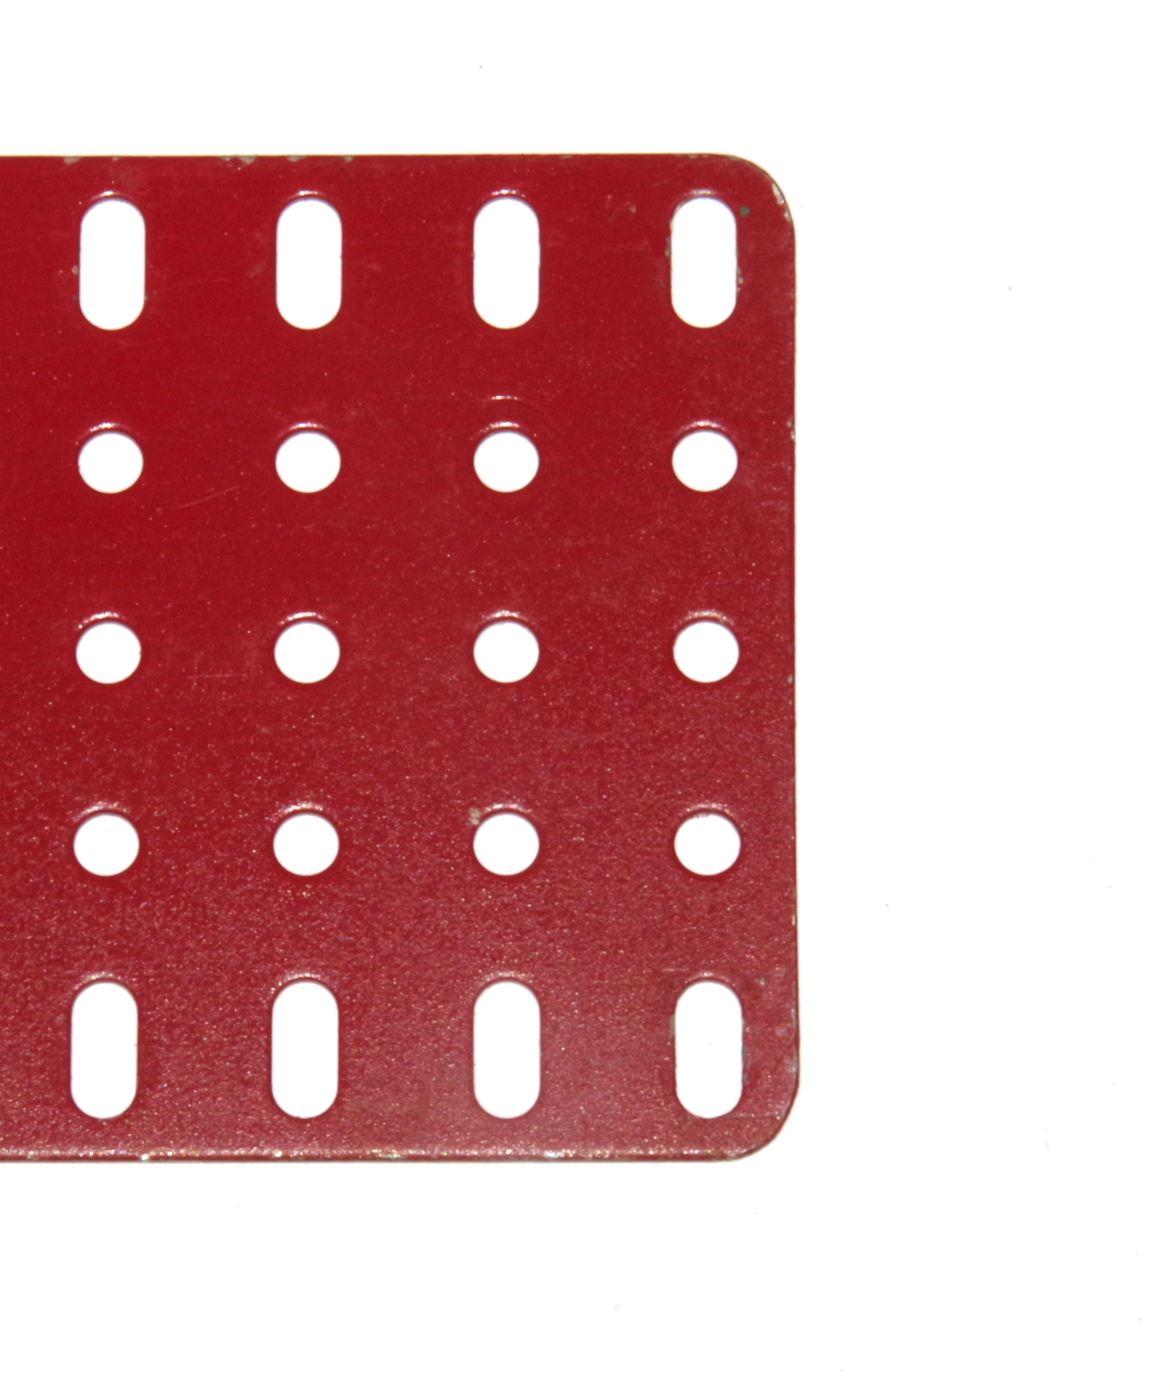 70 Flat Plate 5x11 Hole Mid Red Used